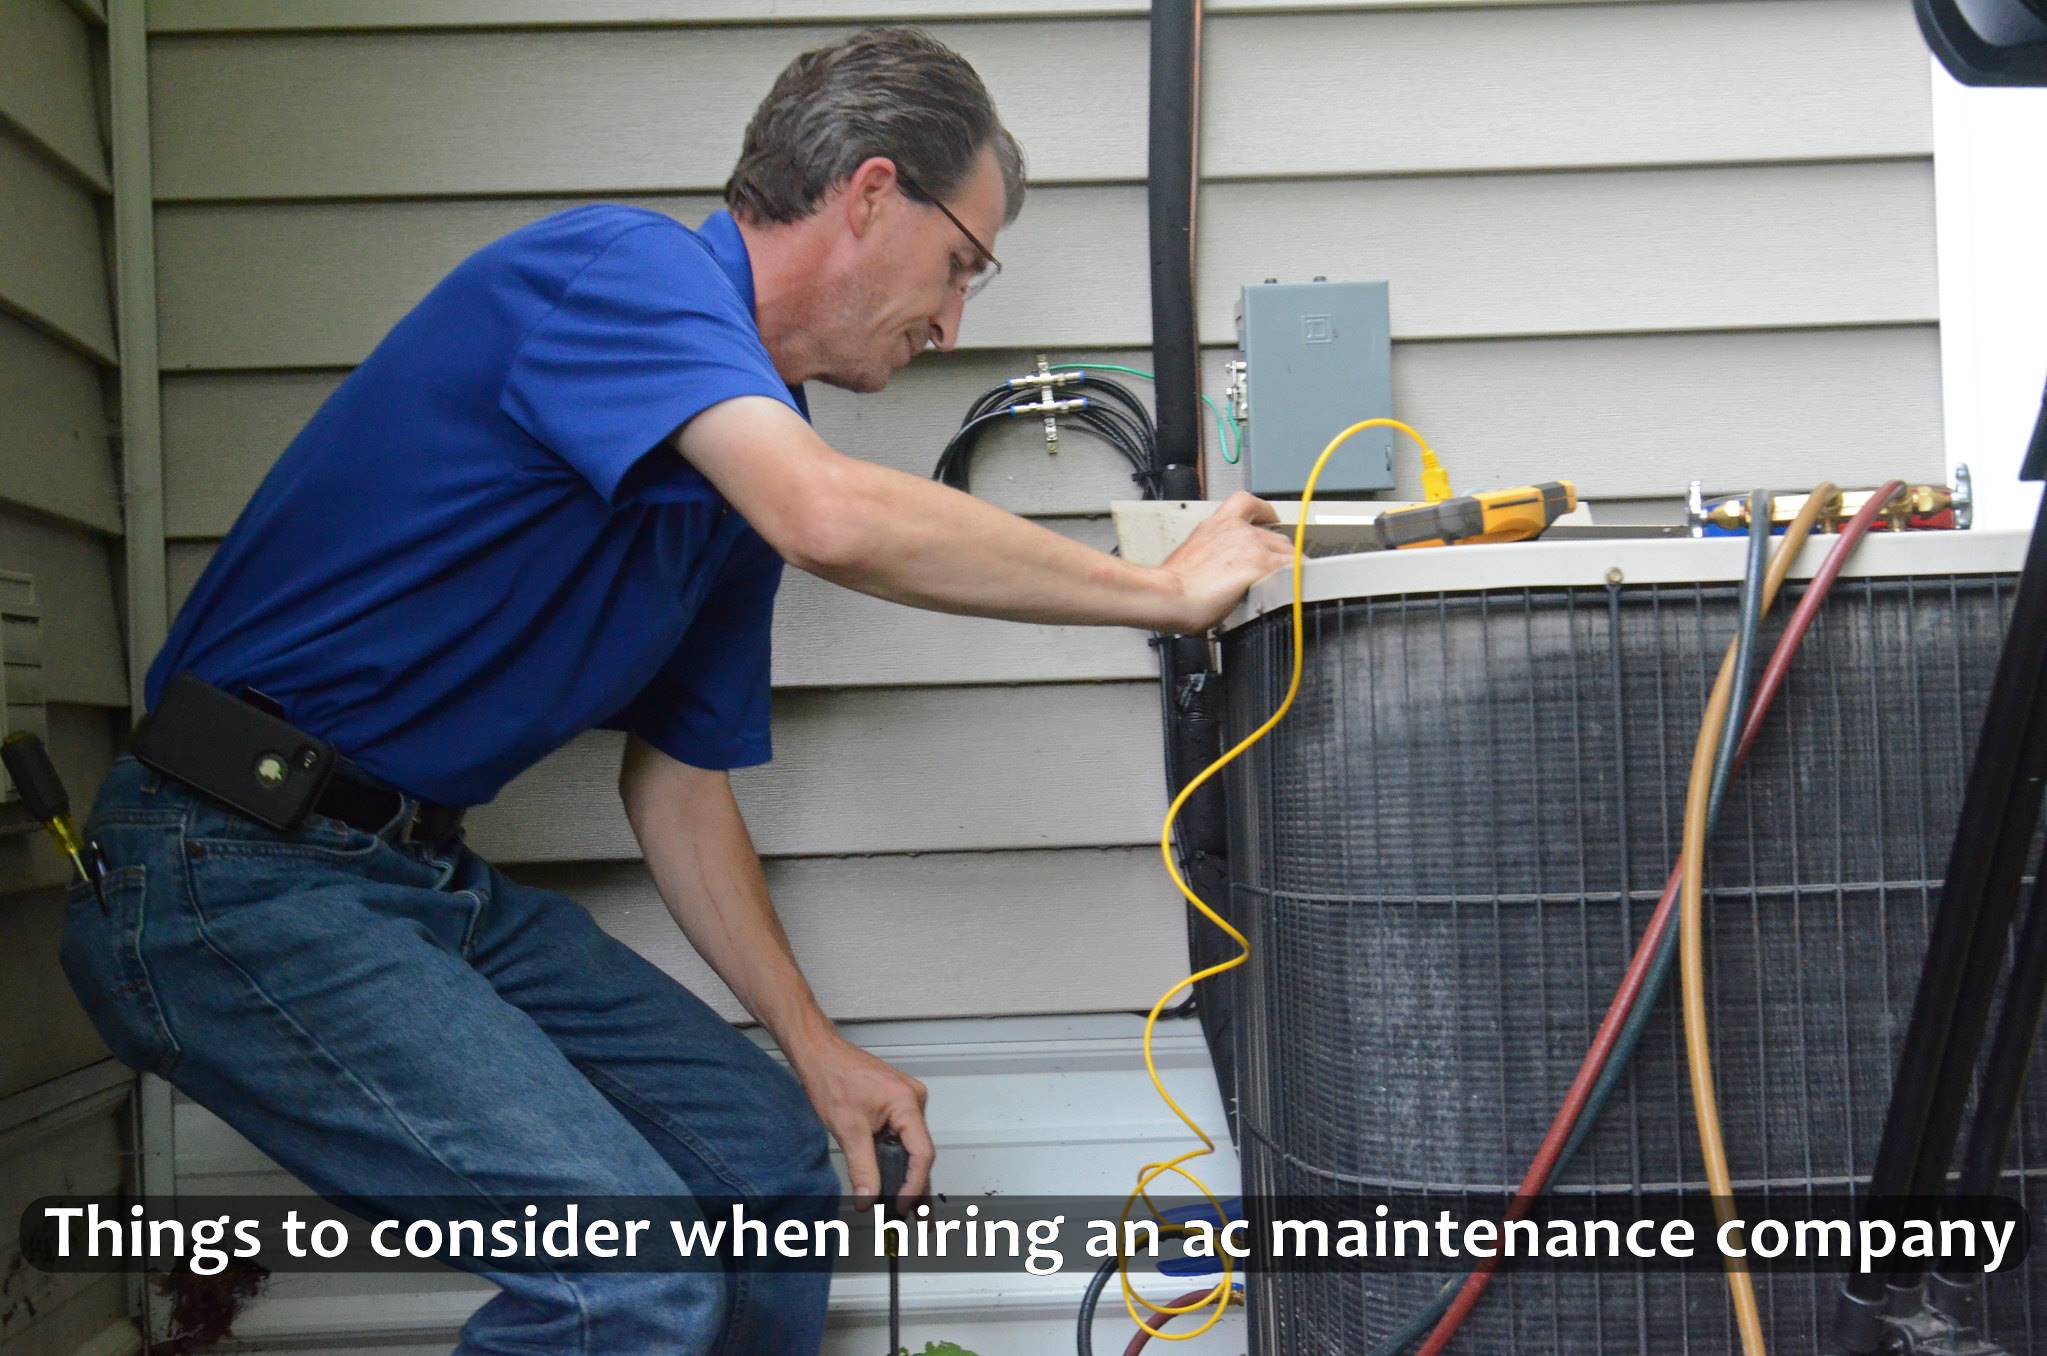 Things to consider when hiring an ac maintenance company